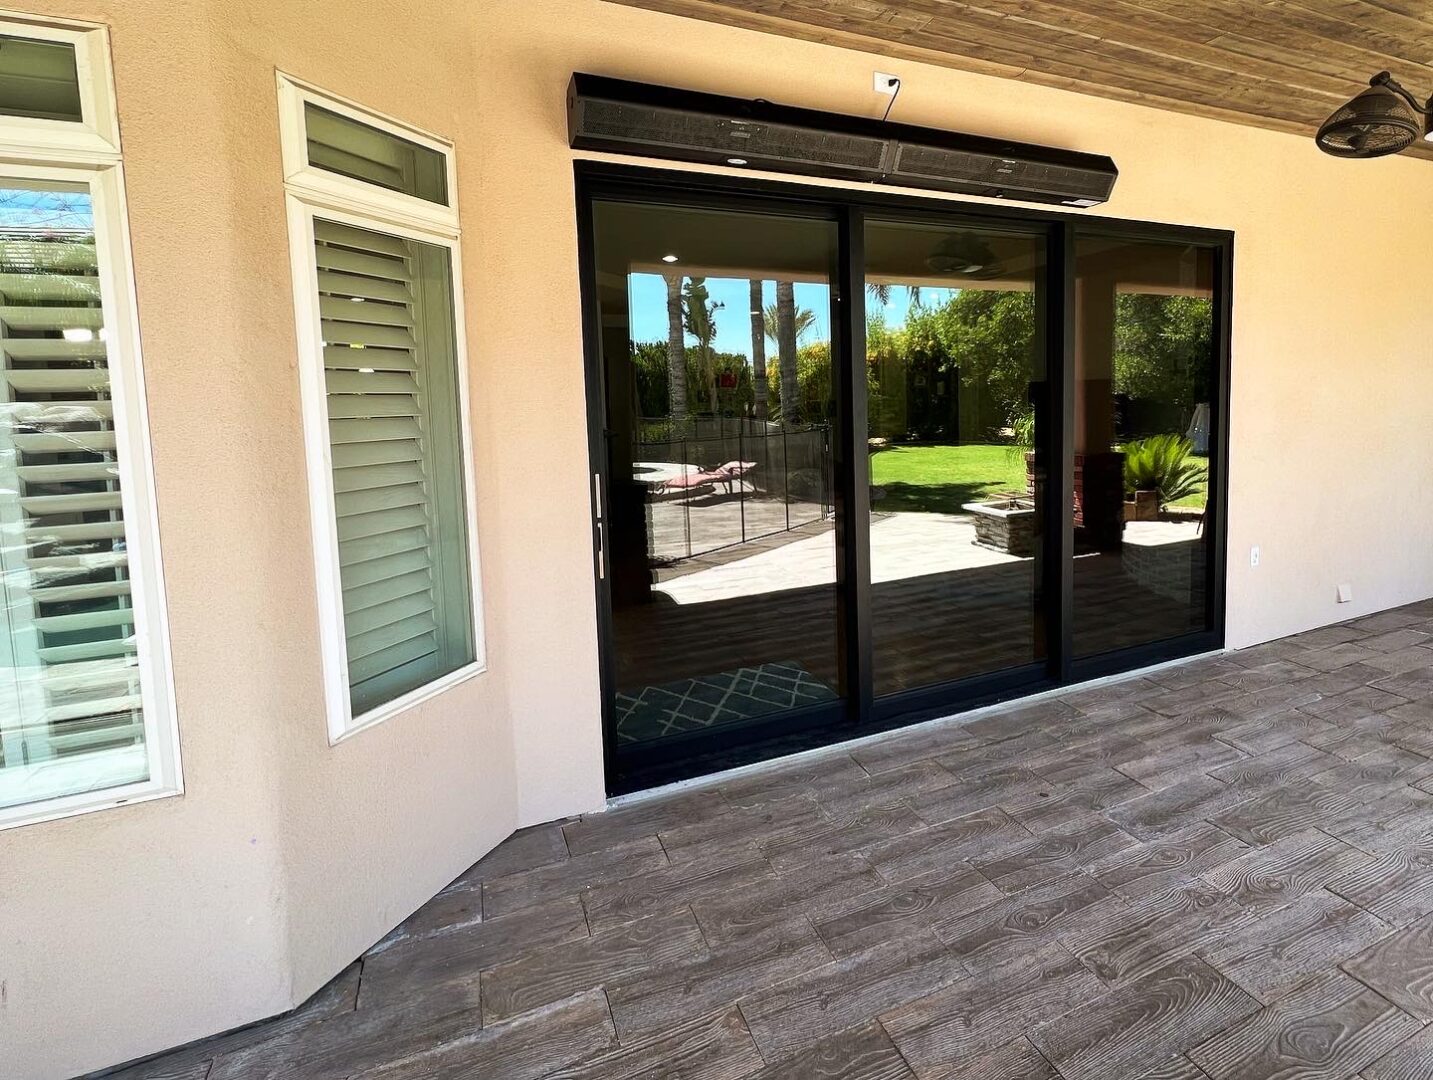 A sliding glass door in the middle of a patio.